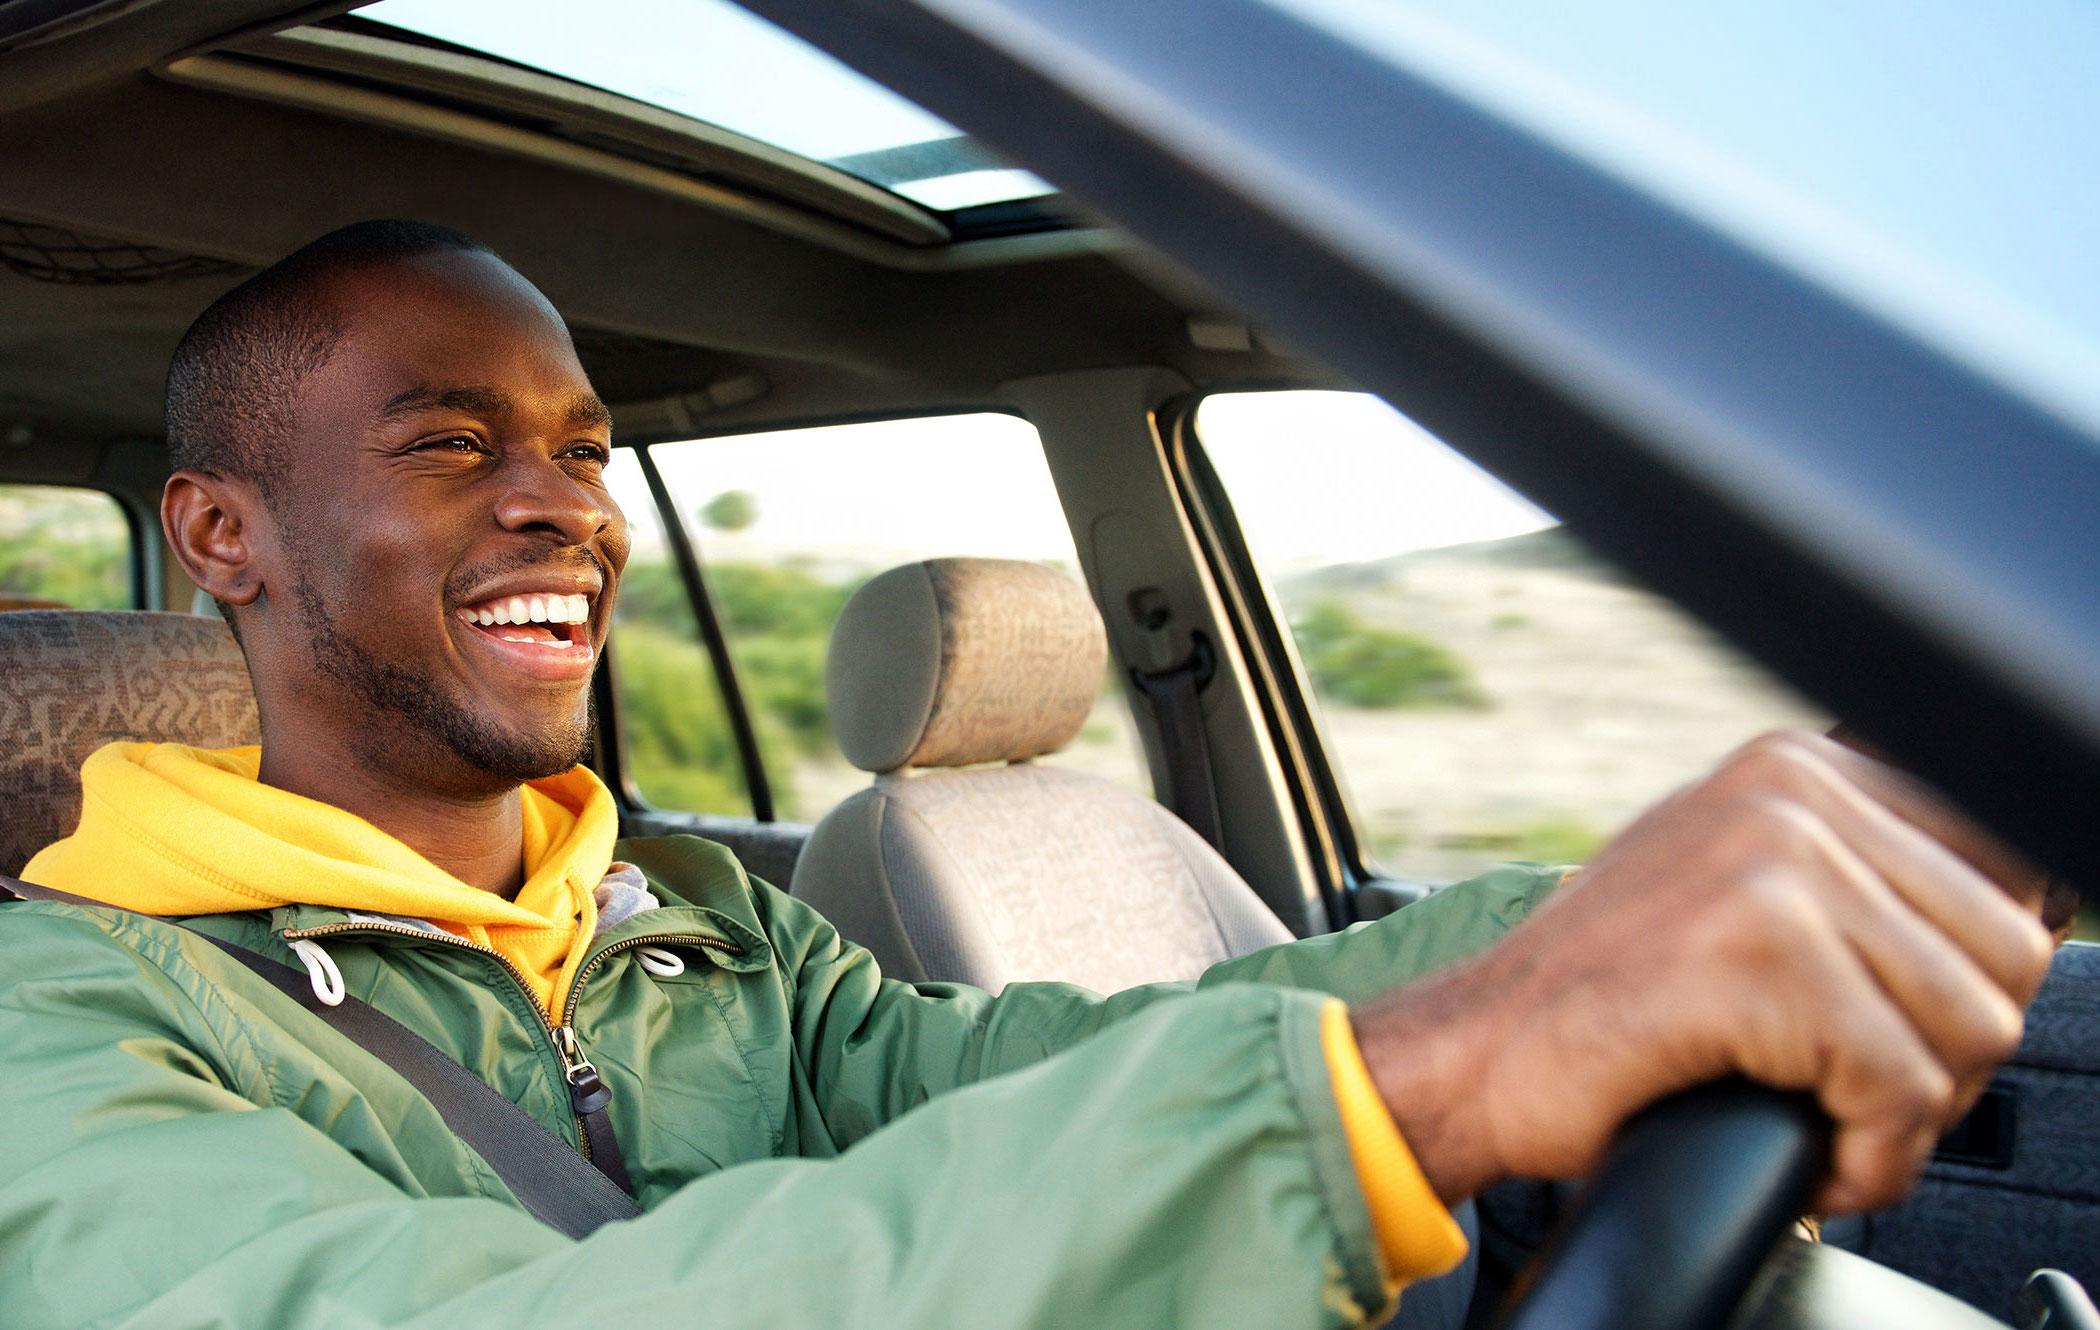 A smiling man sits in his car with his hands on the steering wheel